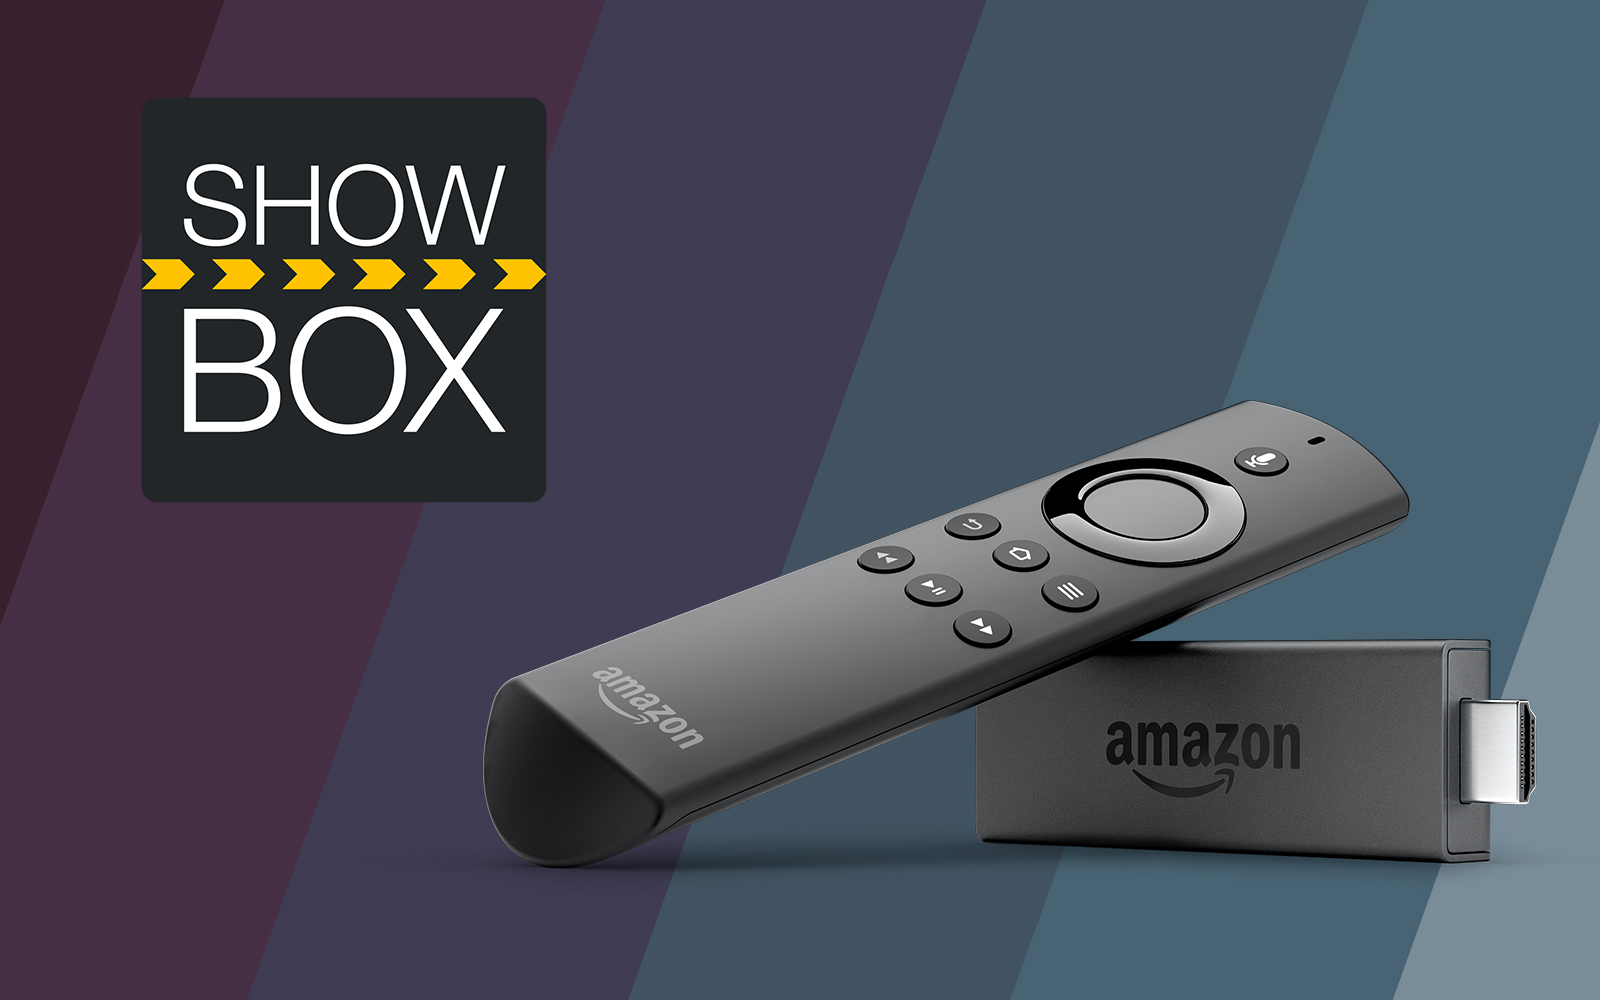 How To Install Showbox on an Amazon Fire TV Stick